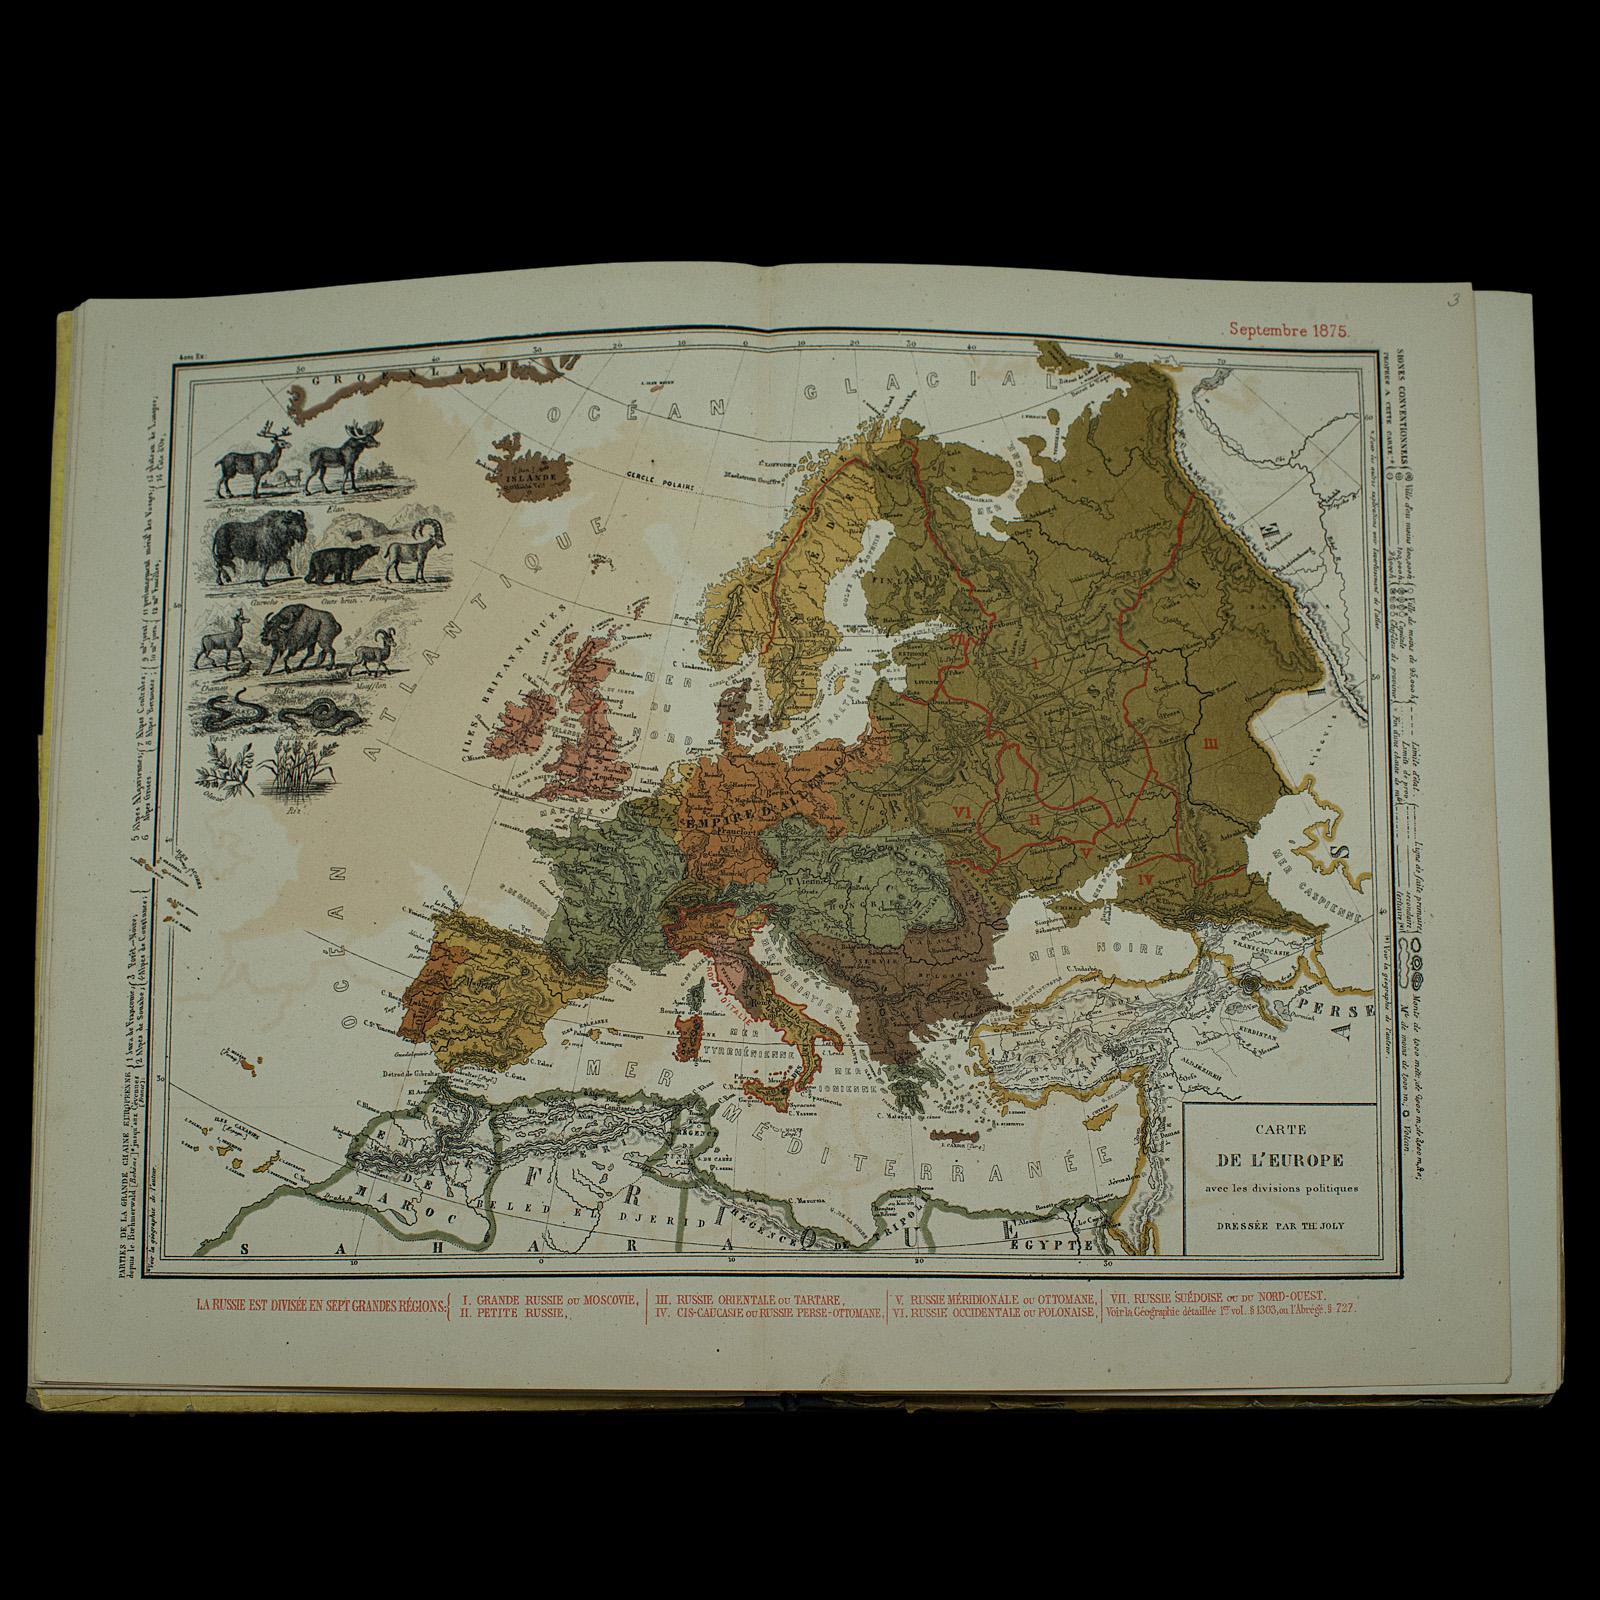 19th Century Antique World Atlas, French Language, Cartography, Reference Book, Victorian